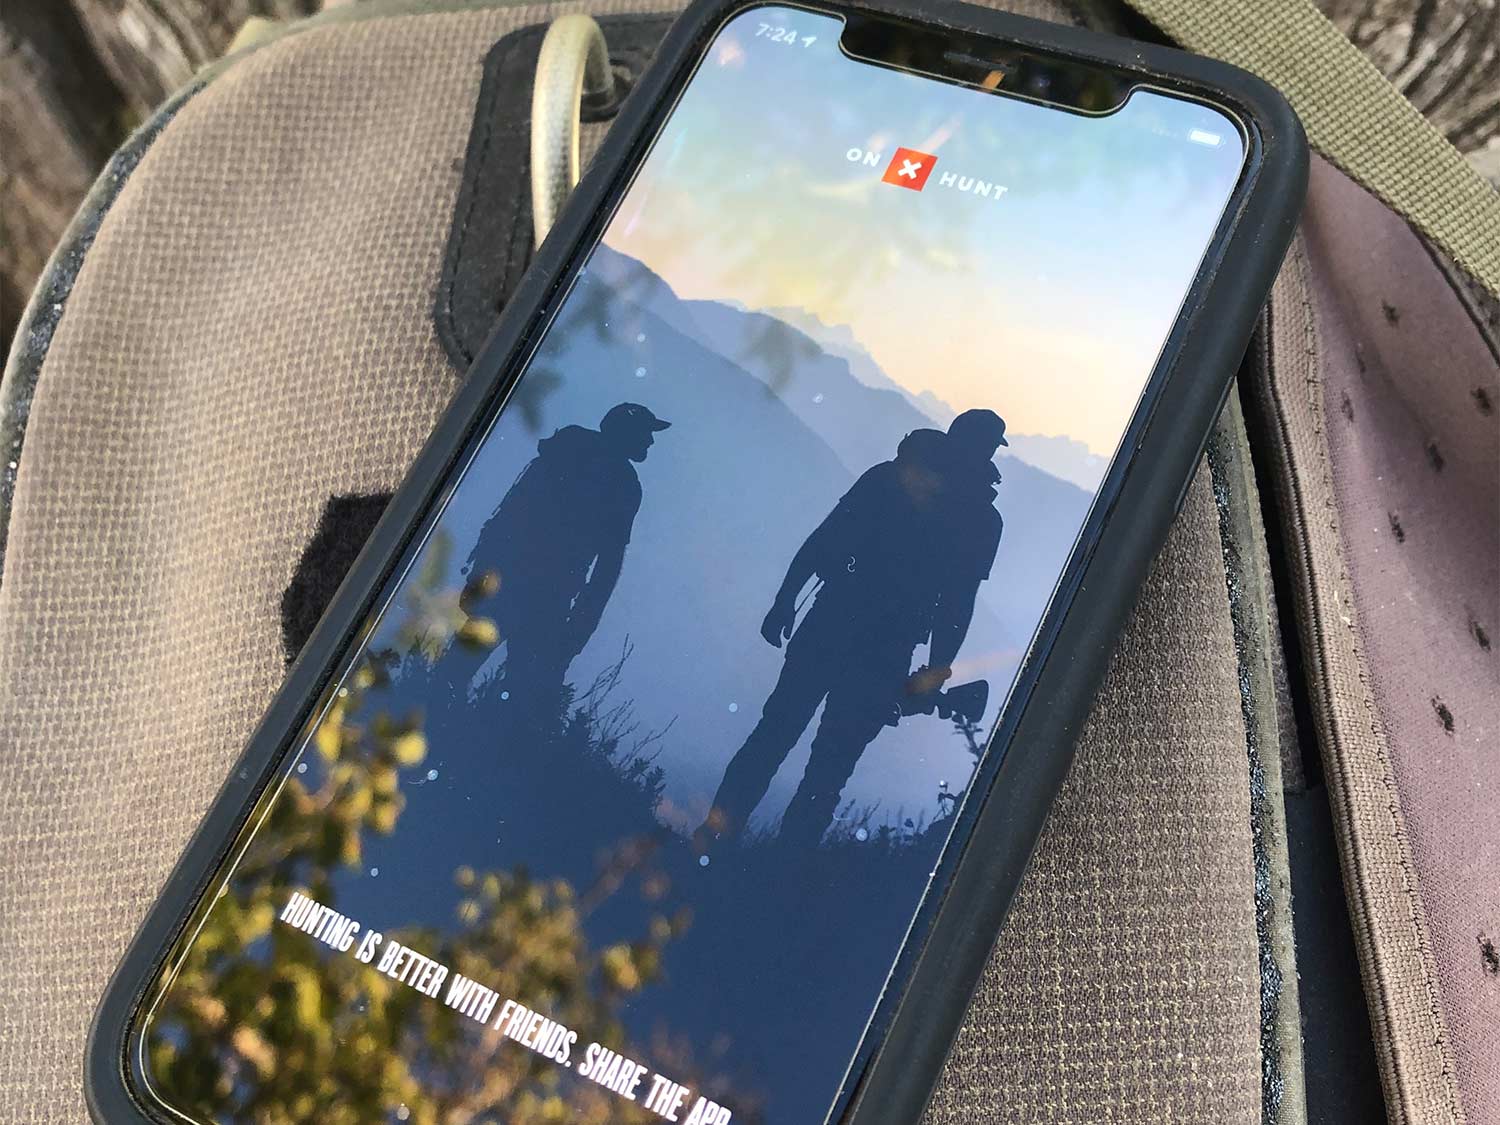 Close up image of the onX hunt app on a phone.